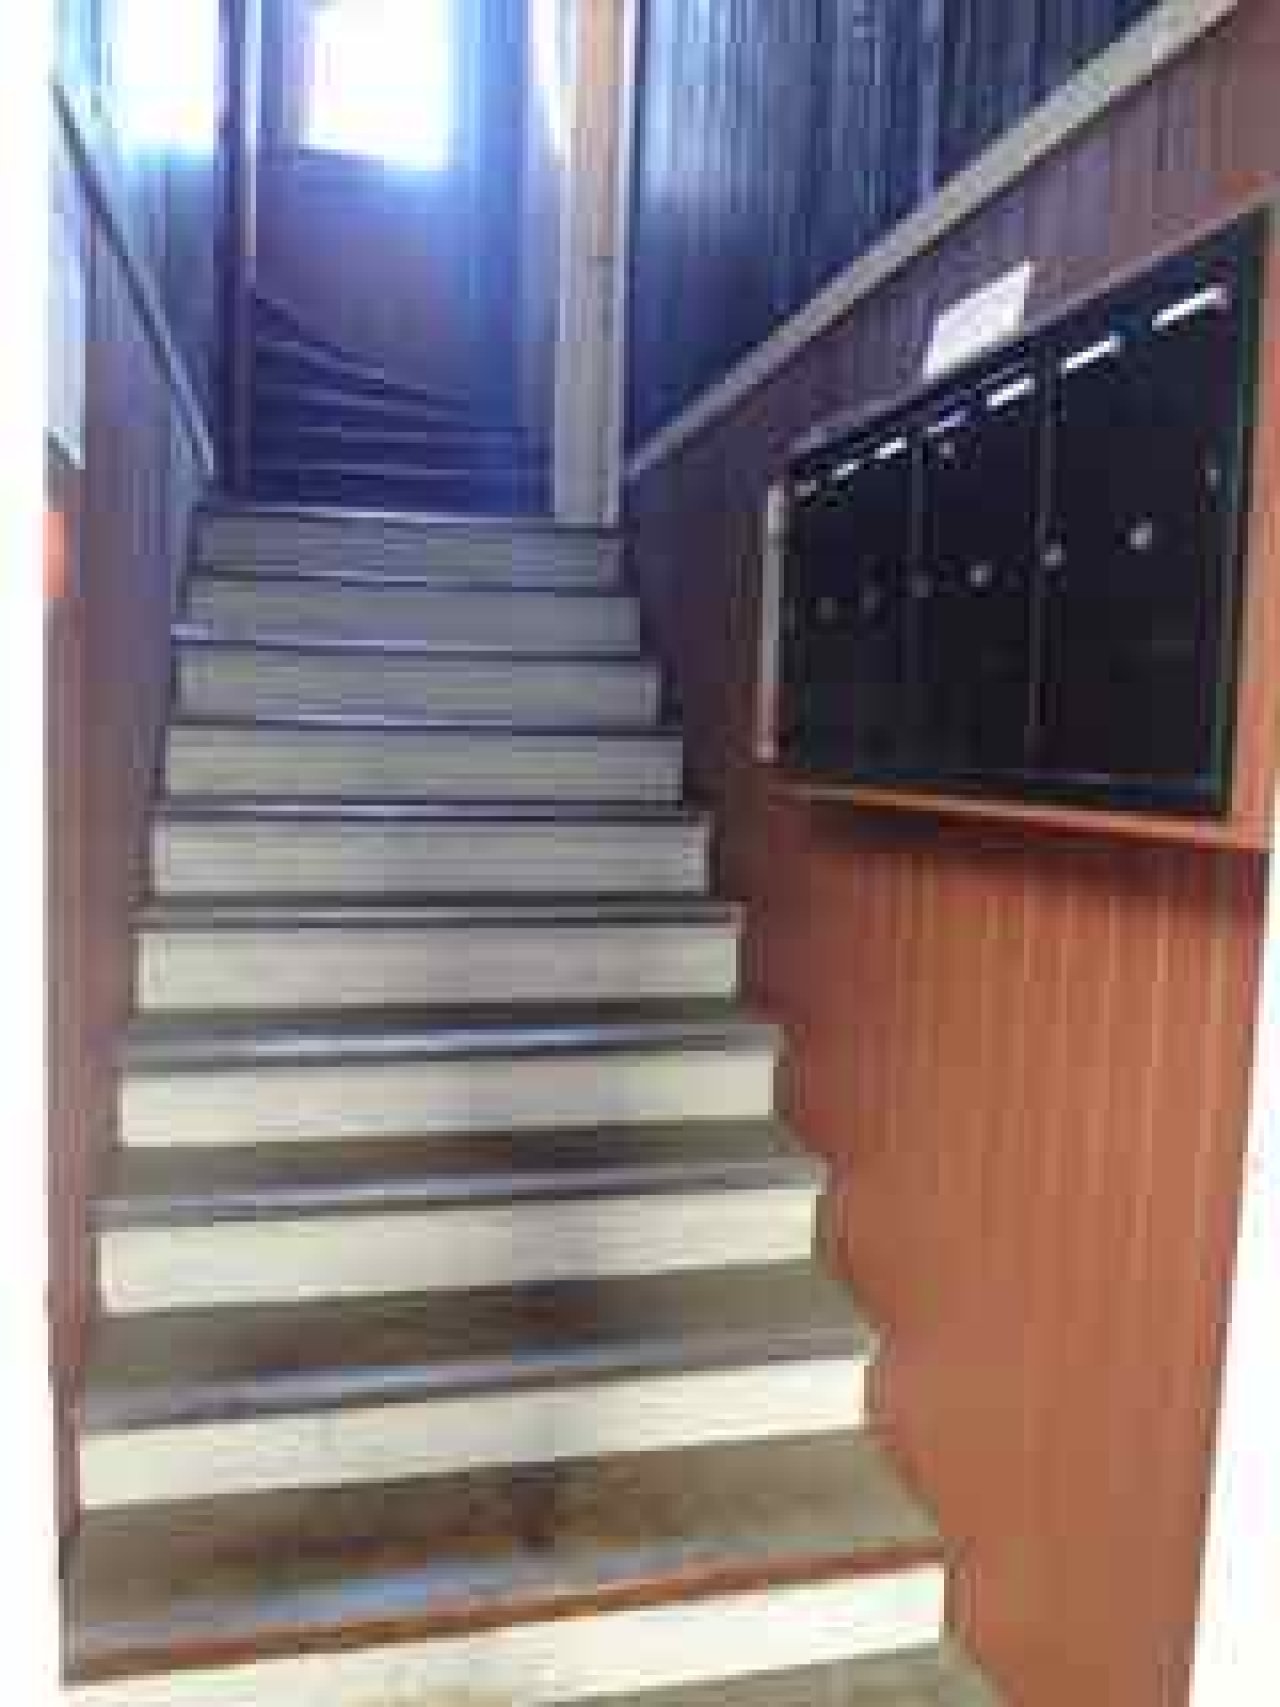 Entryway and stairs at the Takehara/Yada Apartments, 1017 W 7th Avenue. Courtesy of Kathy Harris